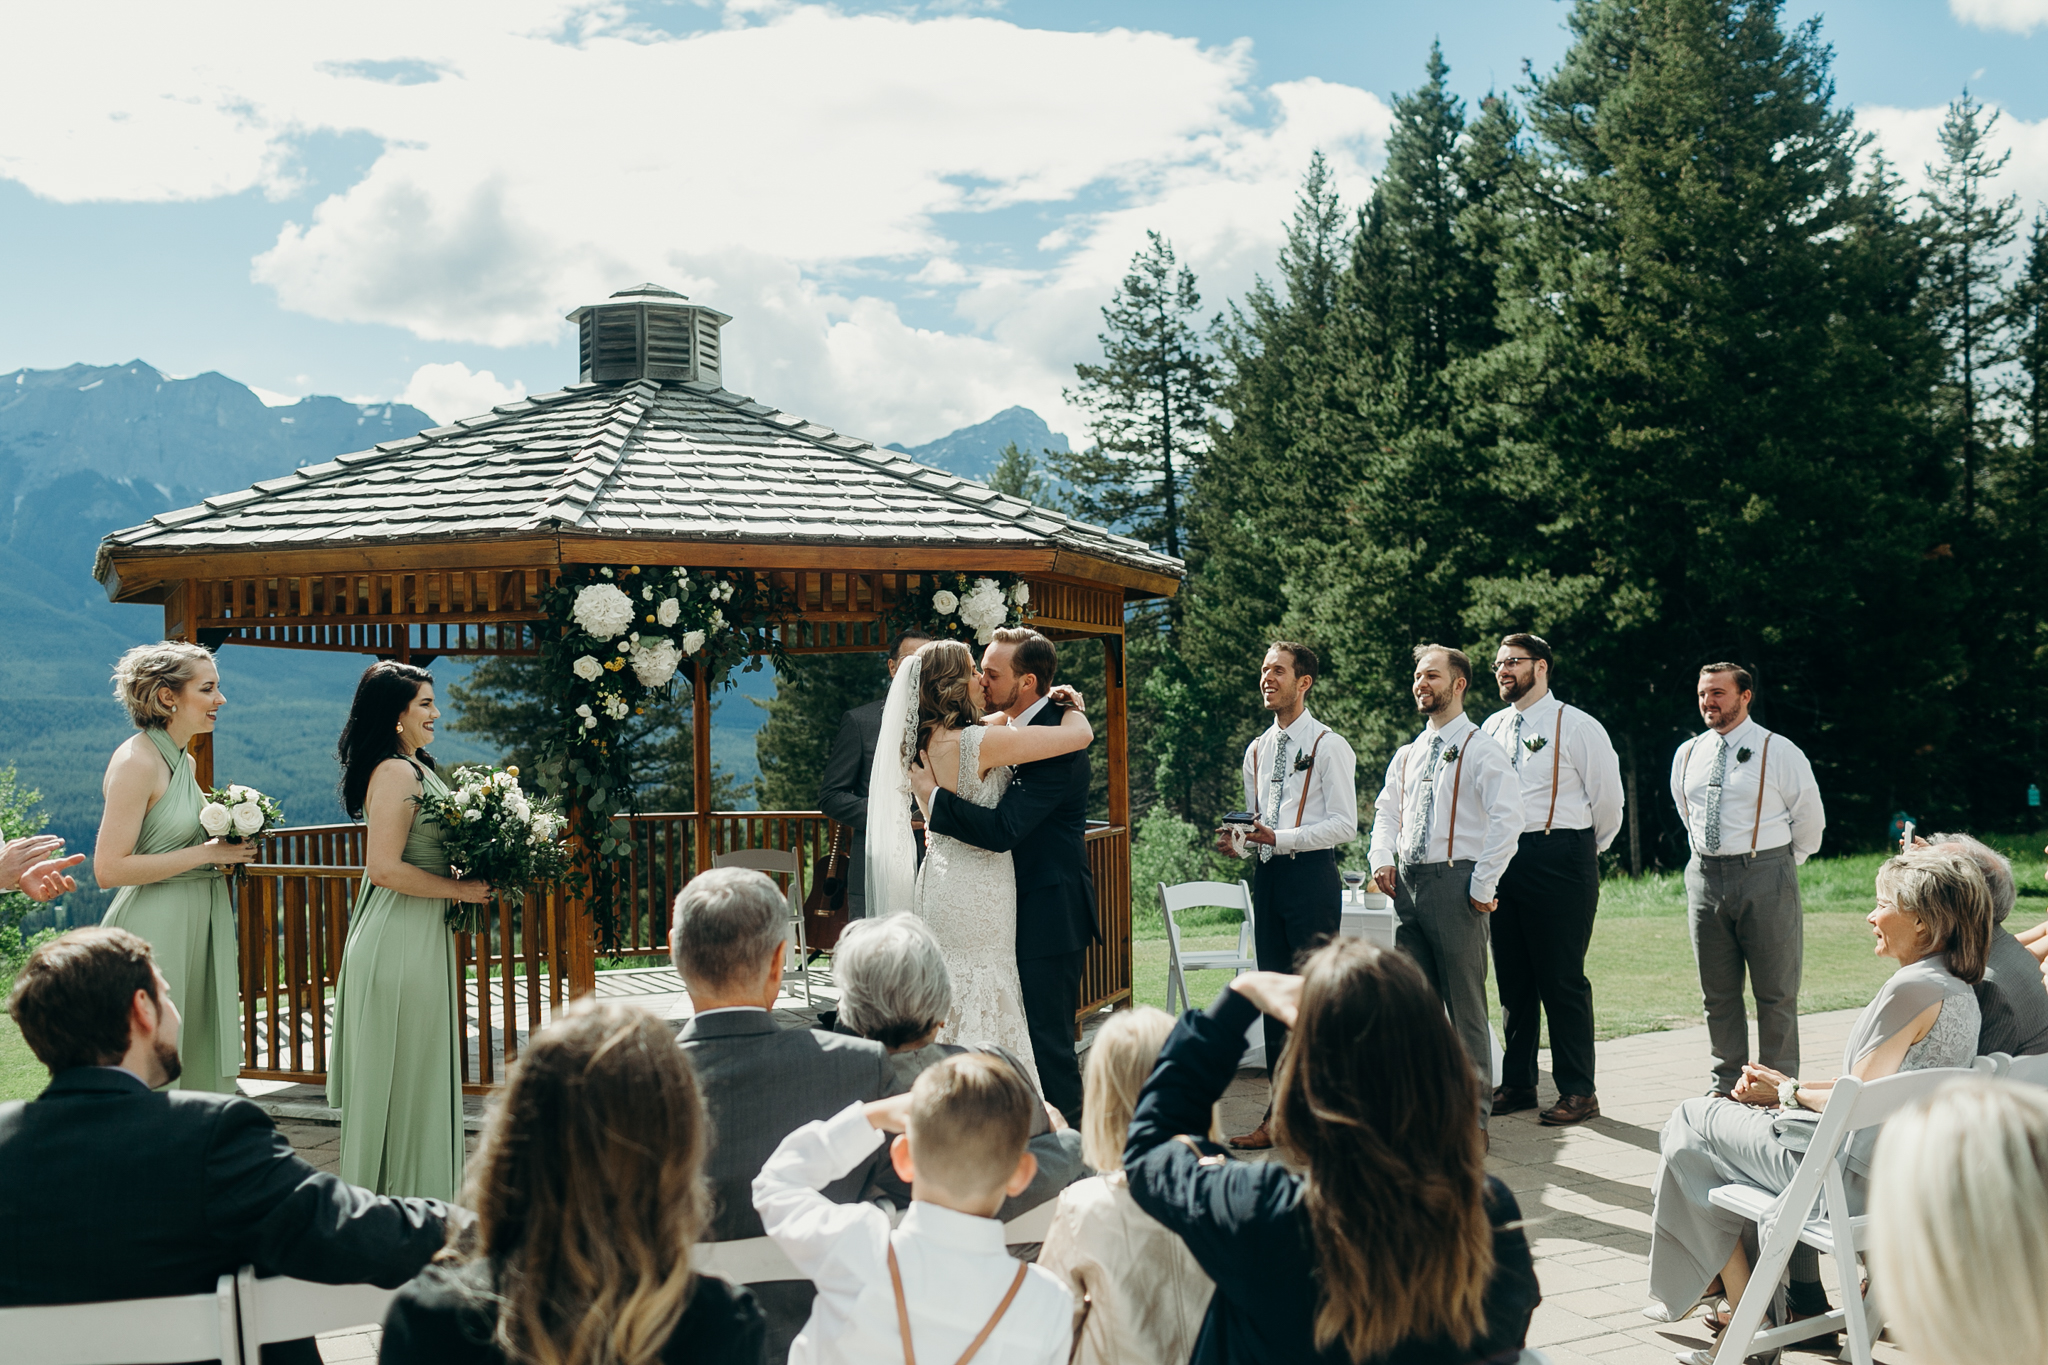 Bride and groom kiss at Silvertip Resort in front of gazebo and mountains